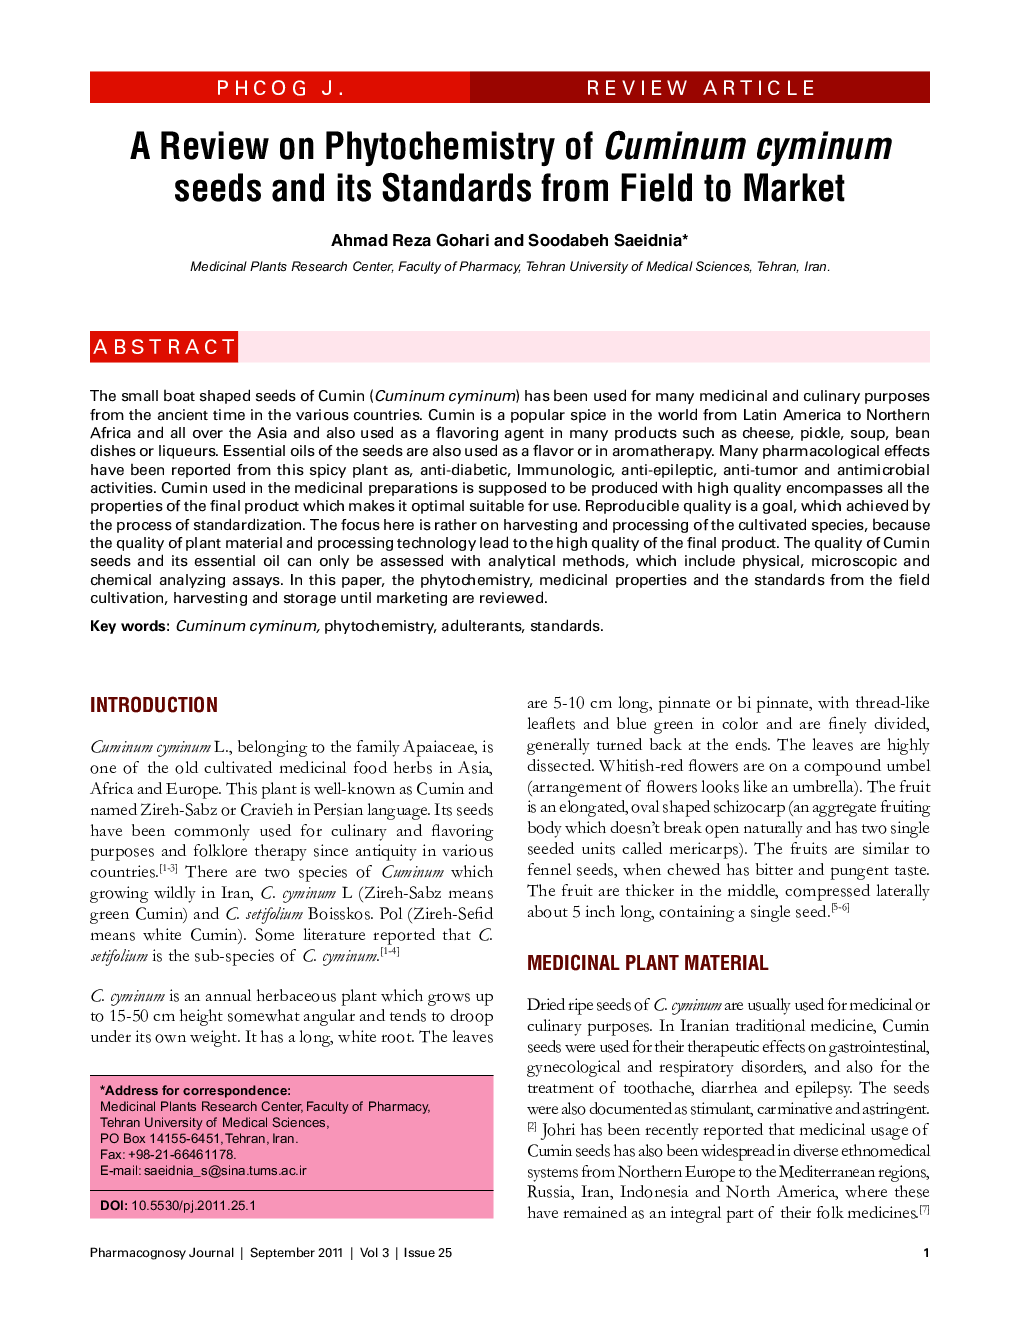 A Review on Phytochemistry of Cuminum cyminum seeds and its Standards from Field to Market